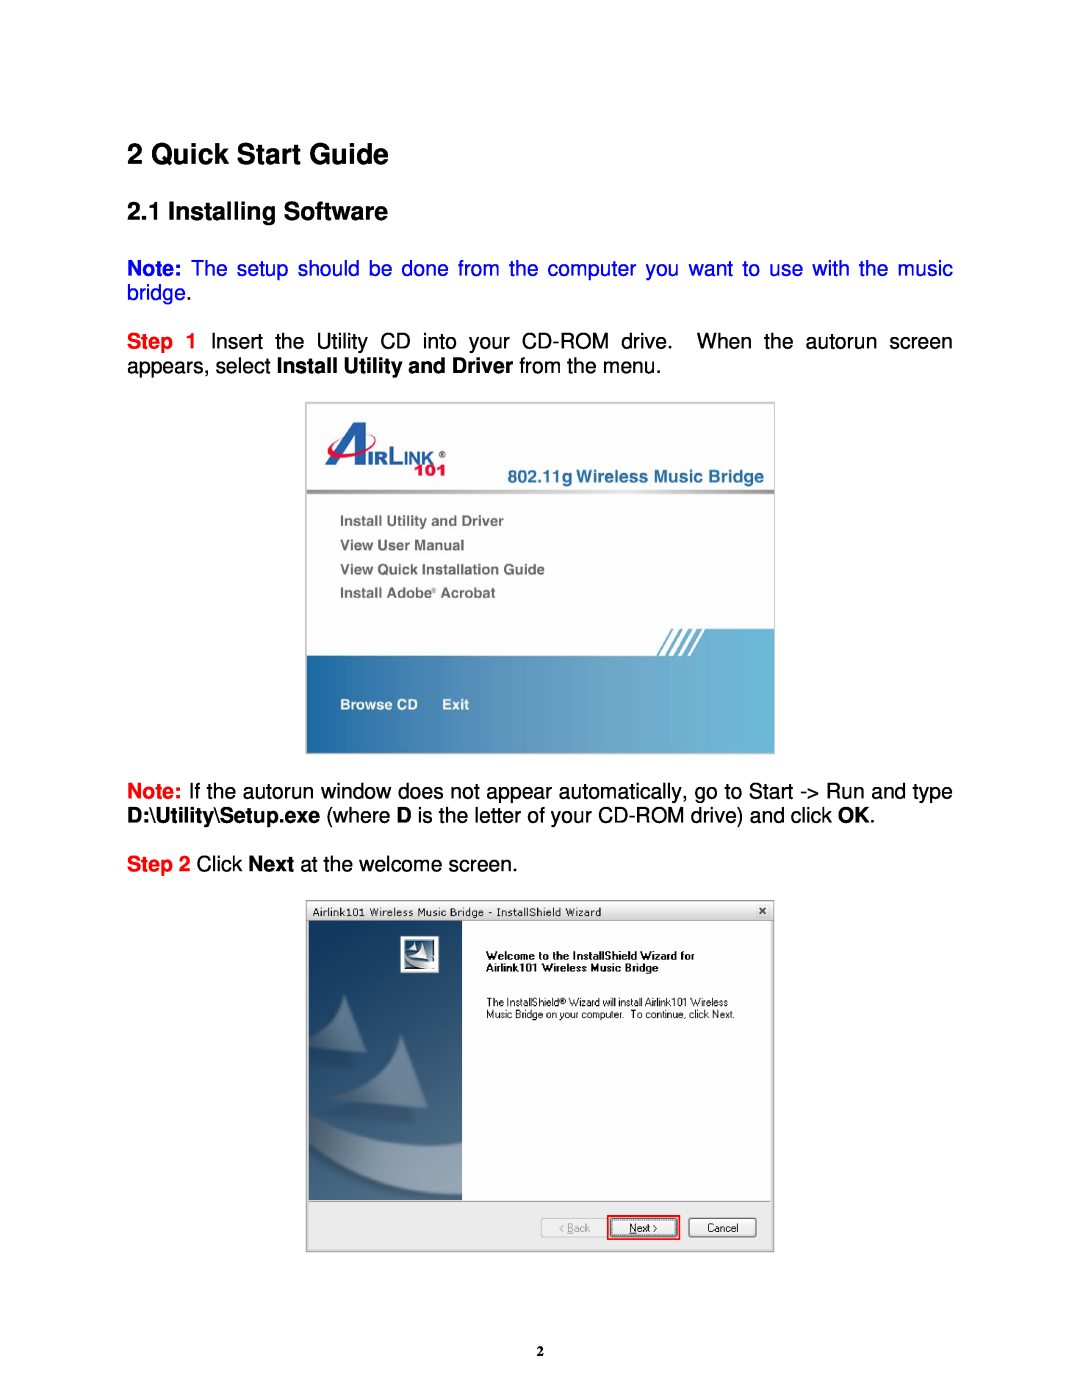 Airlink101 AWMB100 manual Quick Start Guide, Installing Software 